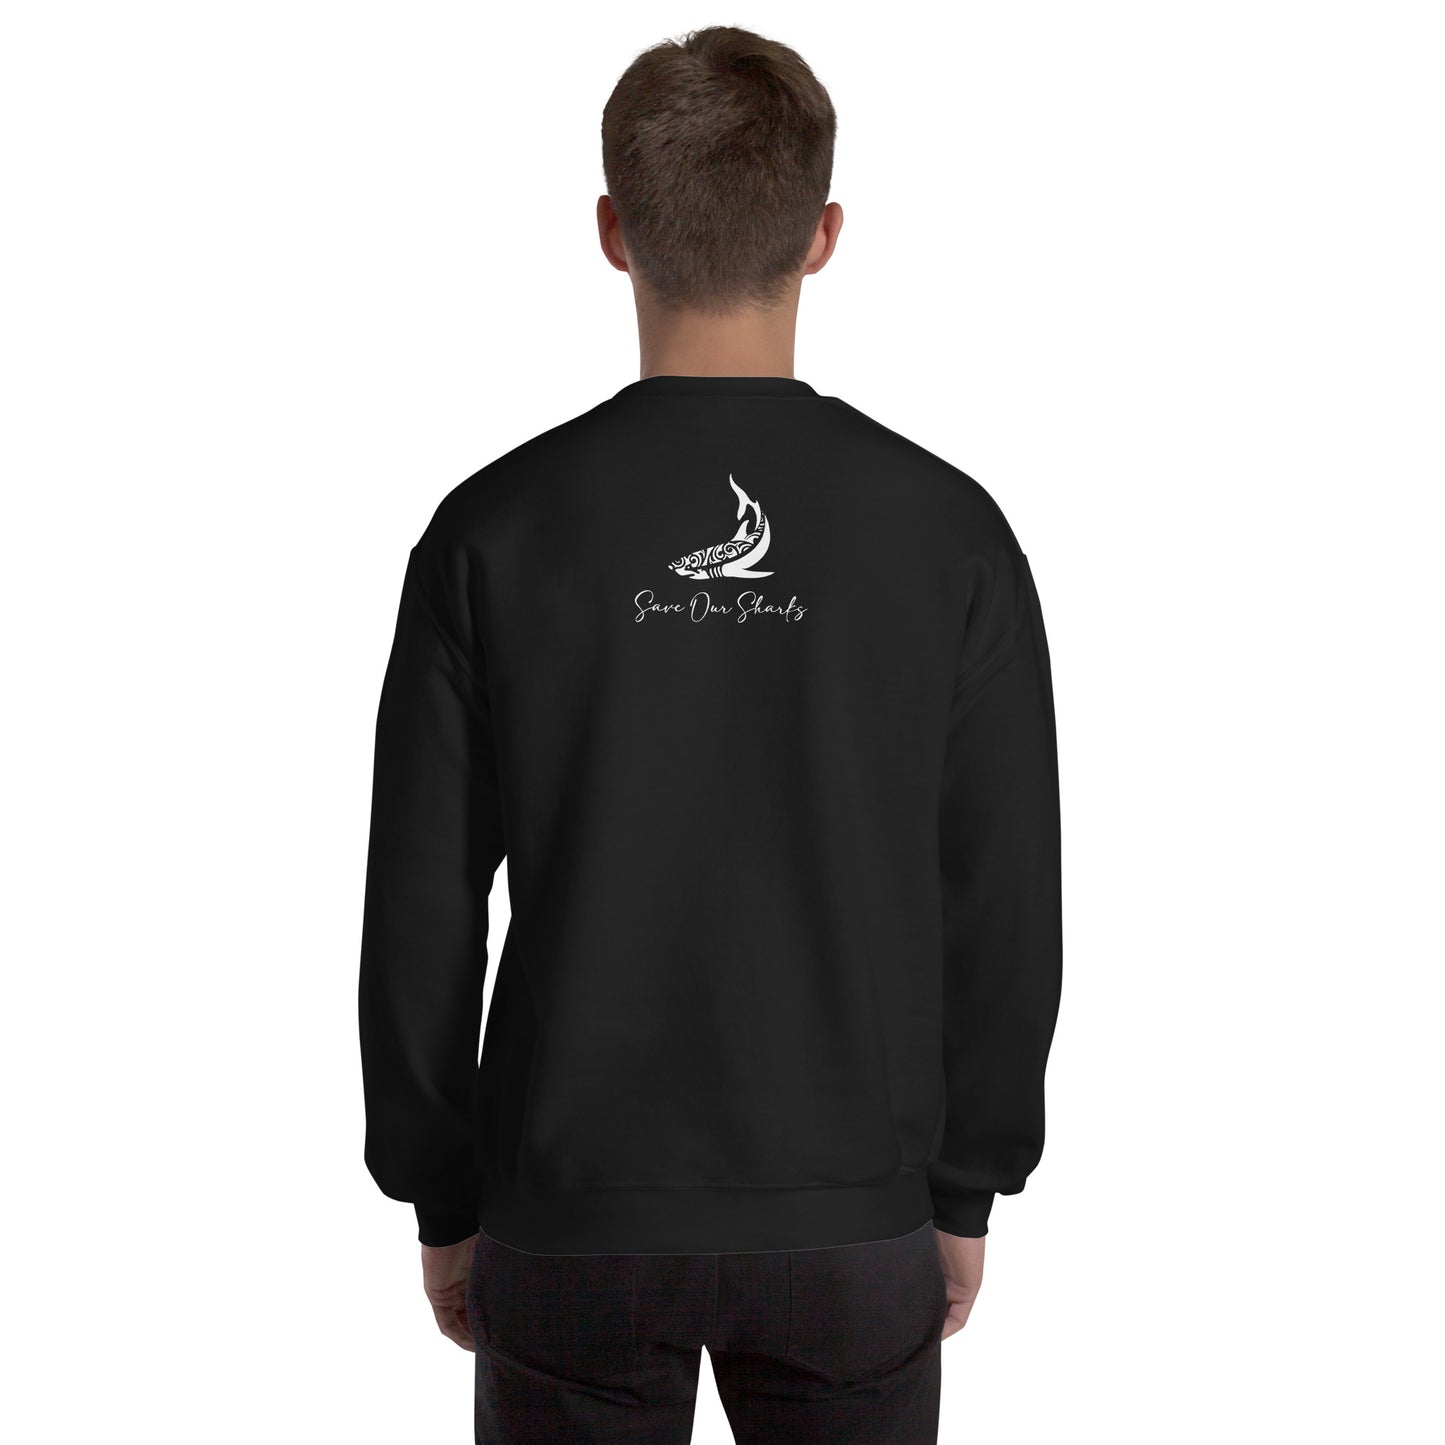 Save Our Sharks Unisex Long Sleeve Round Neck